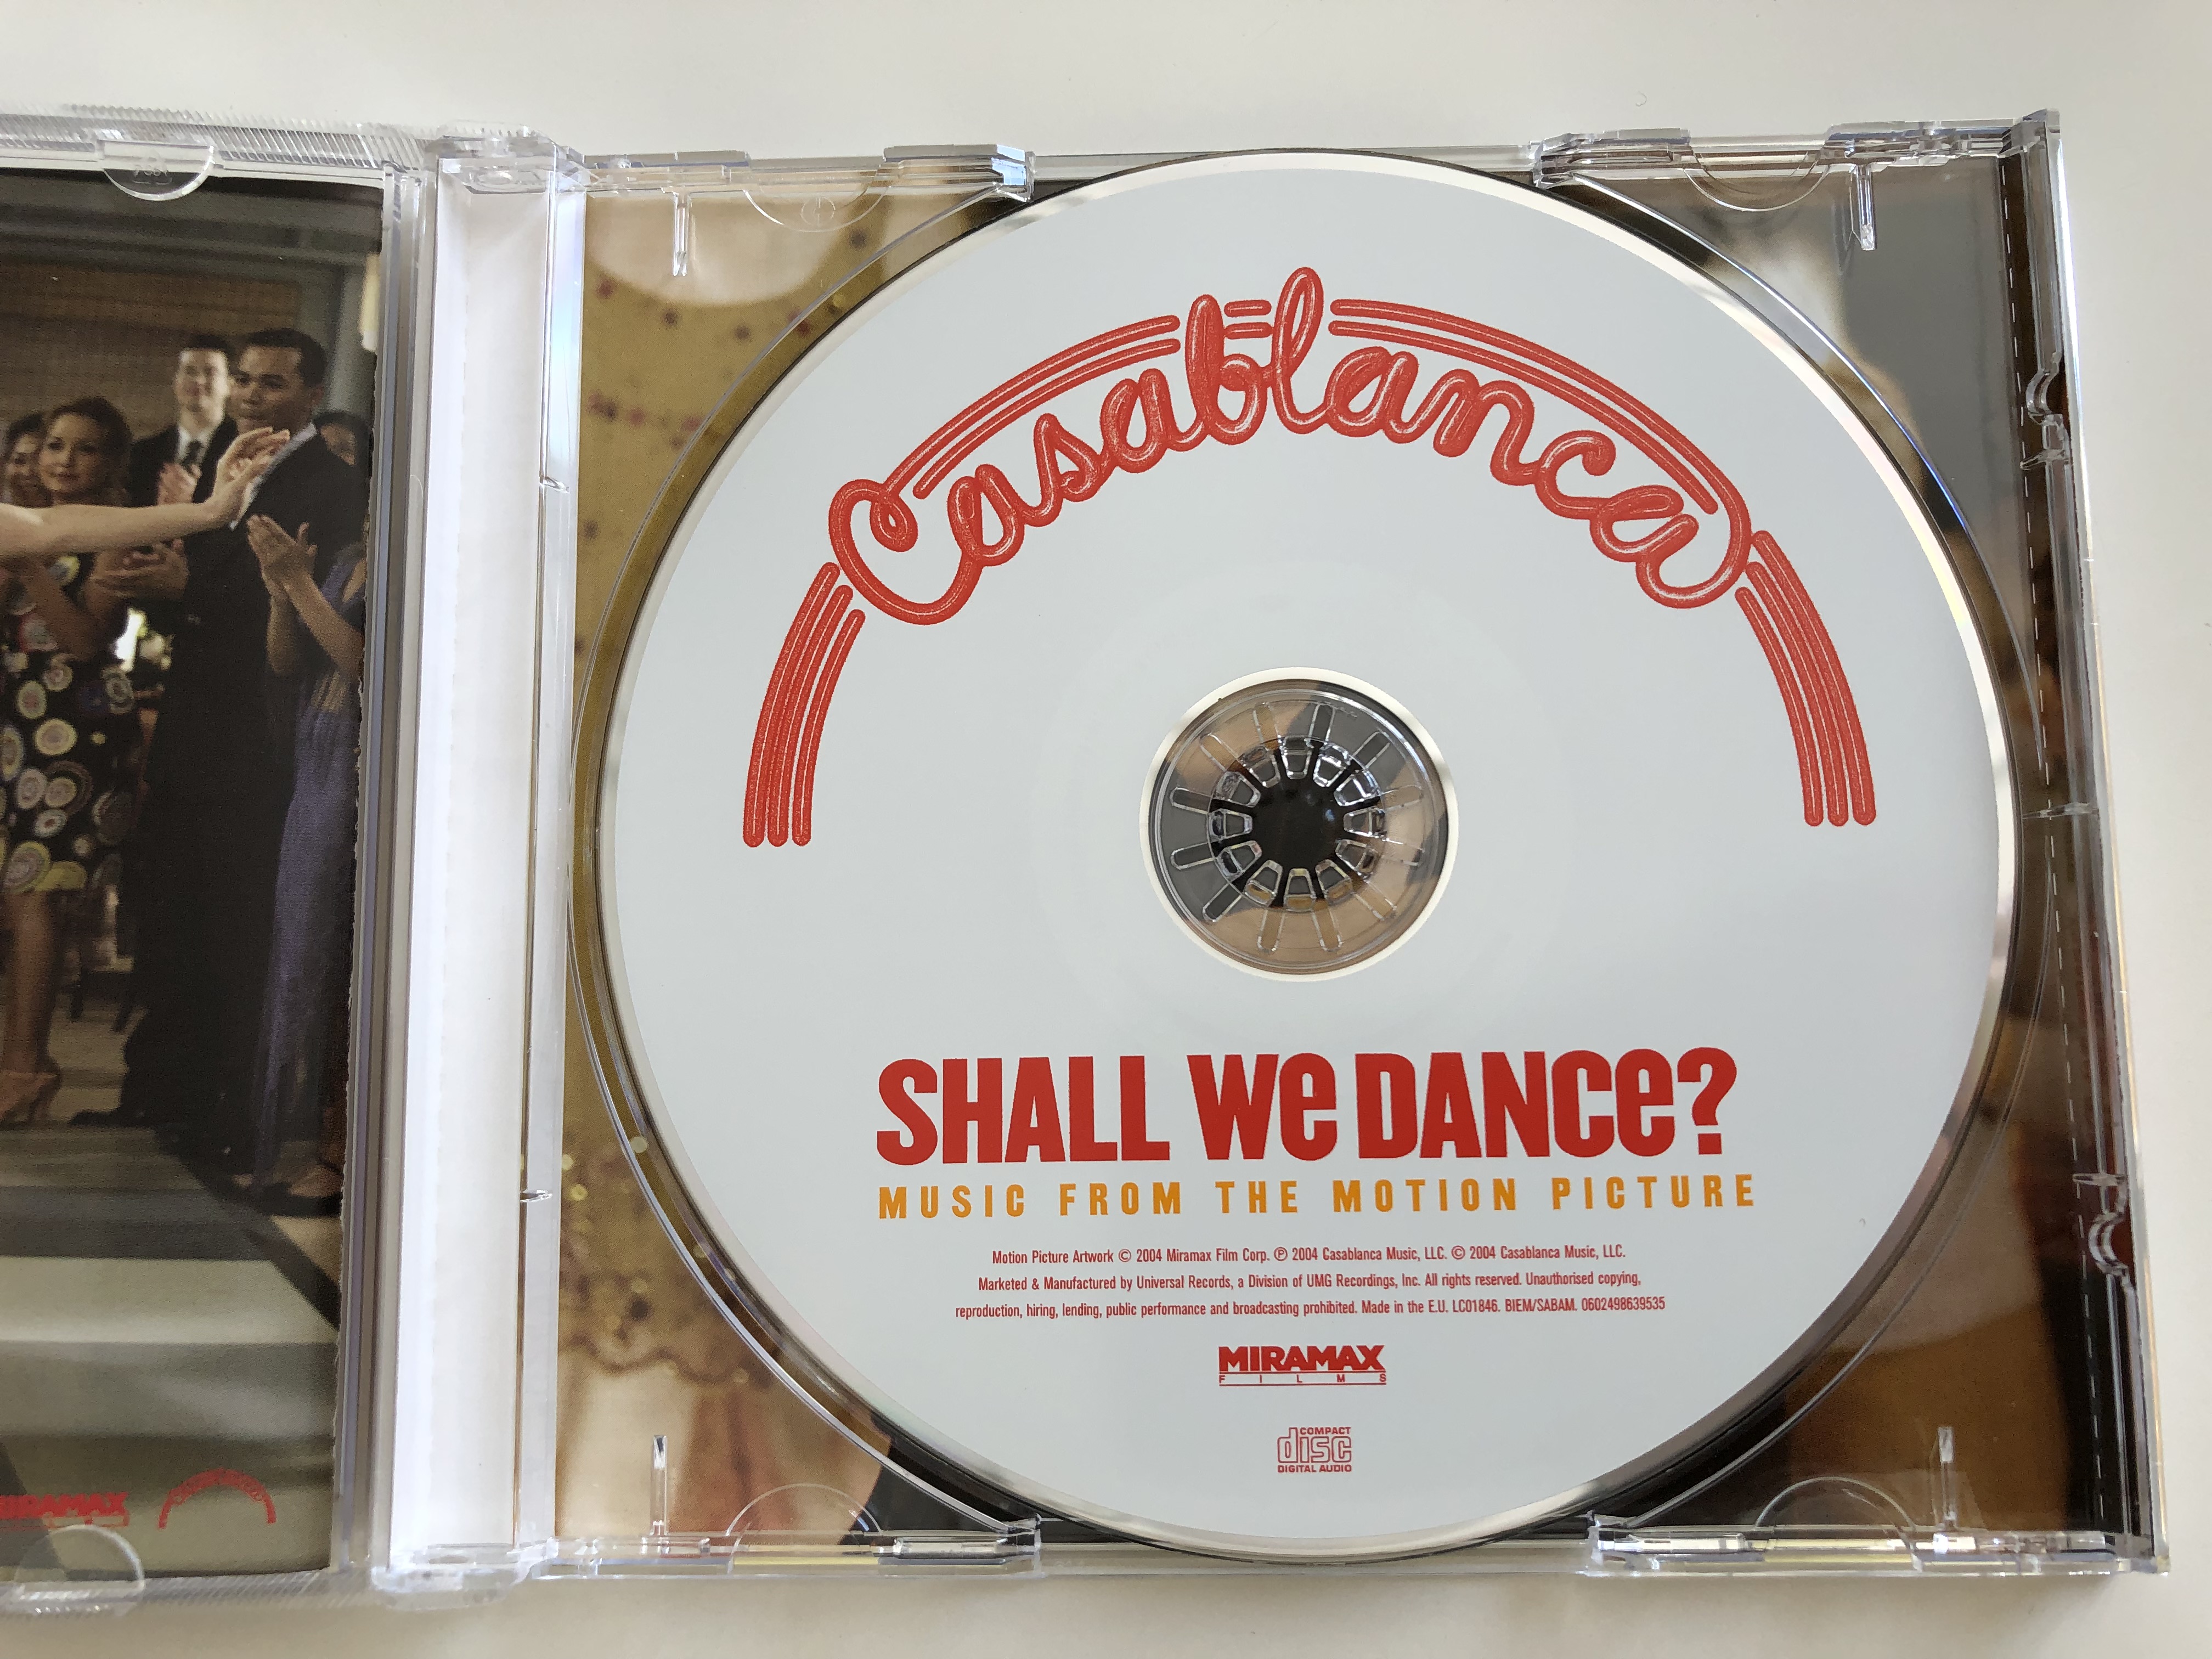 shall-we-dance-music-from-the-motion-picture-audio-cd-2004-soundtrack-produced-by-randy-spendlove-2-.jpg